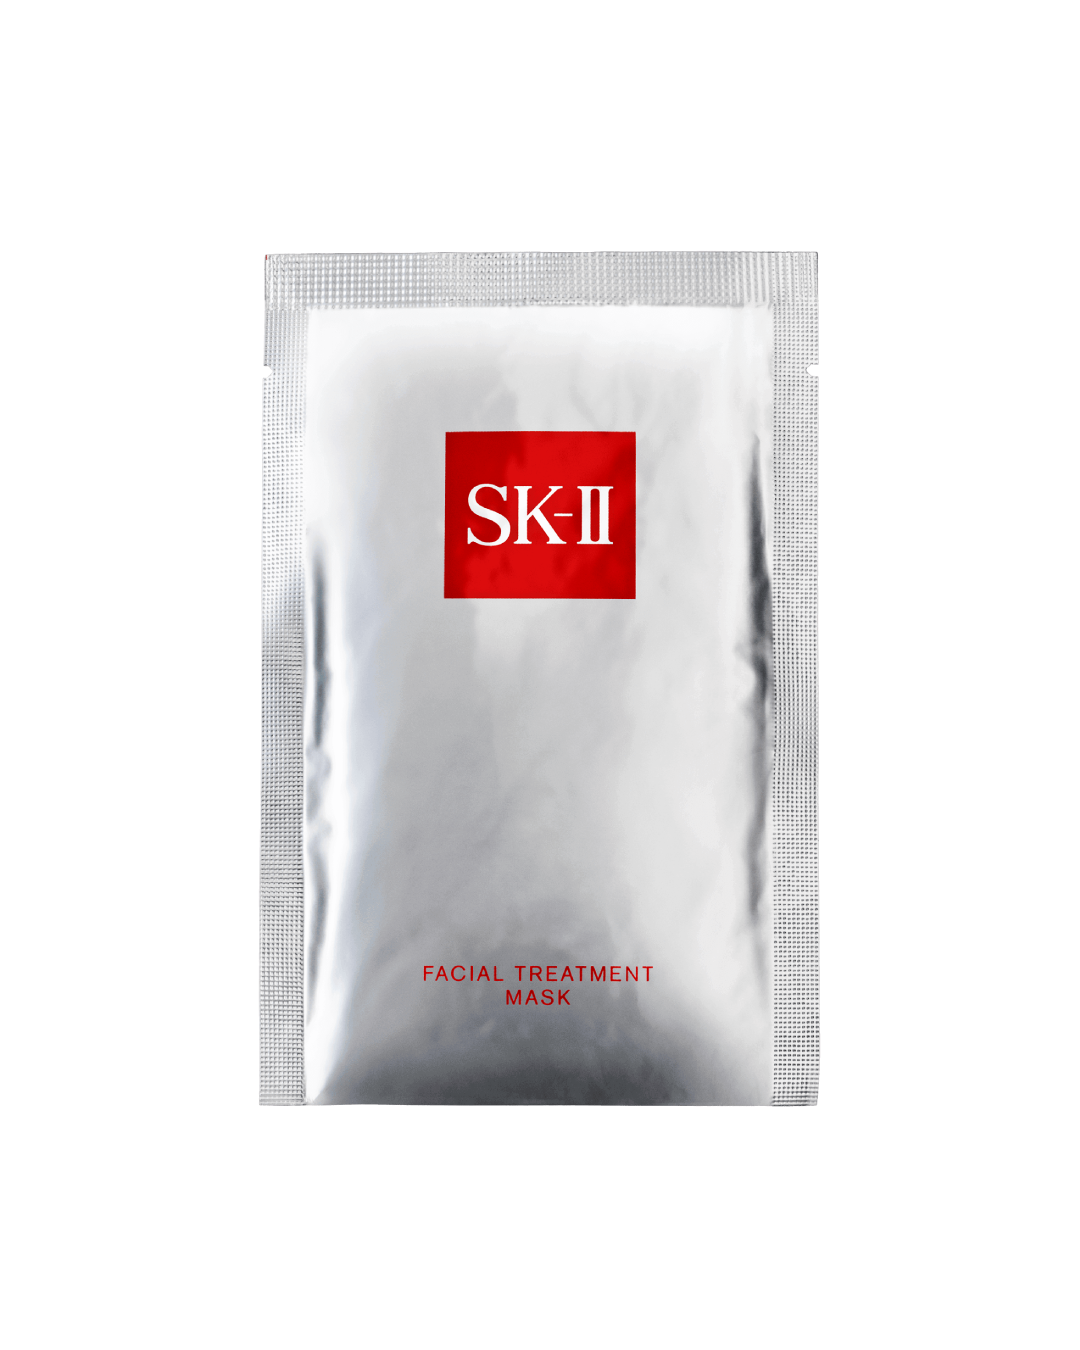 SK-II Facial Treatment Mask (1 sheet) - Best Buy World Philippines